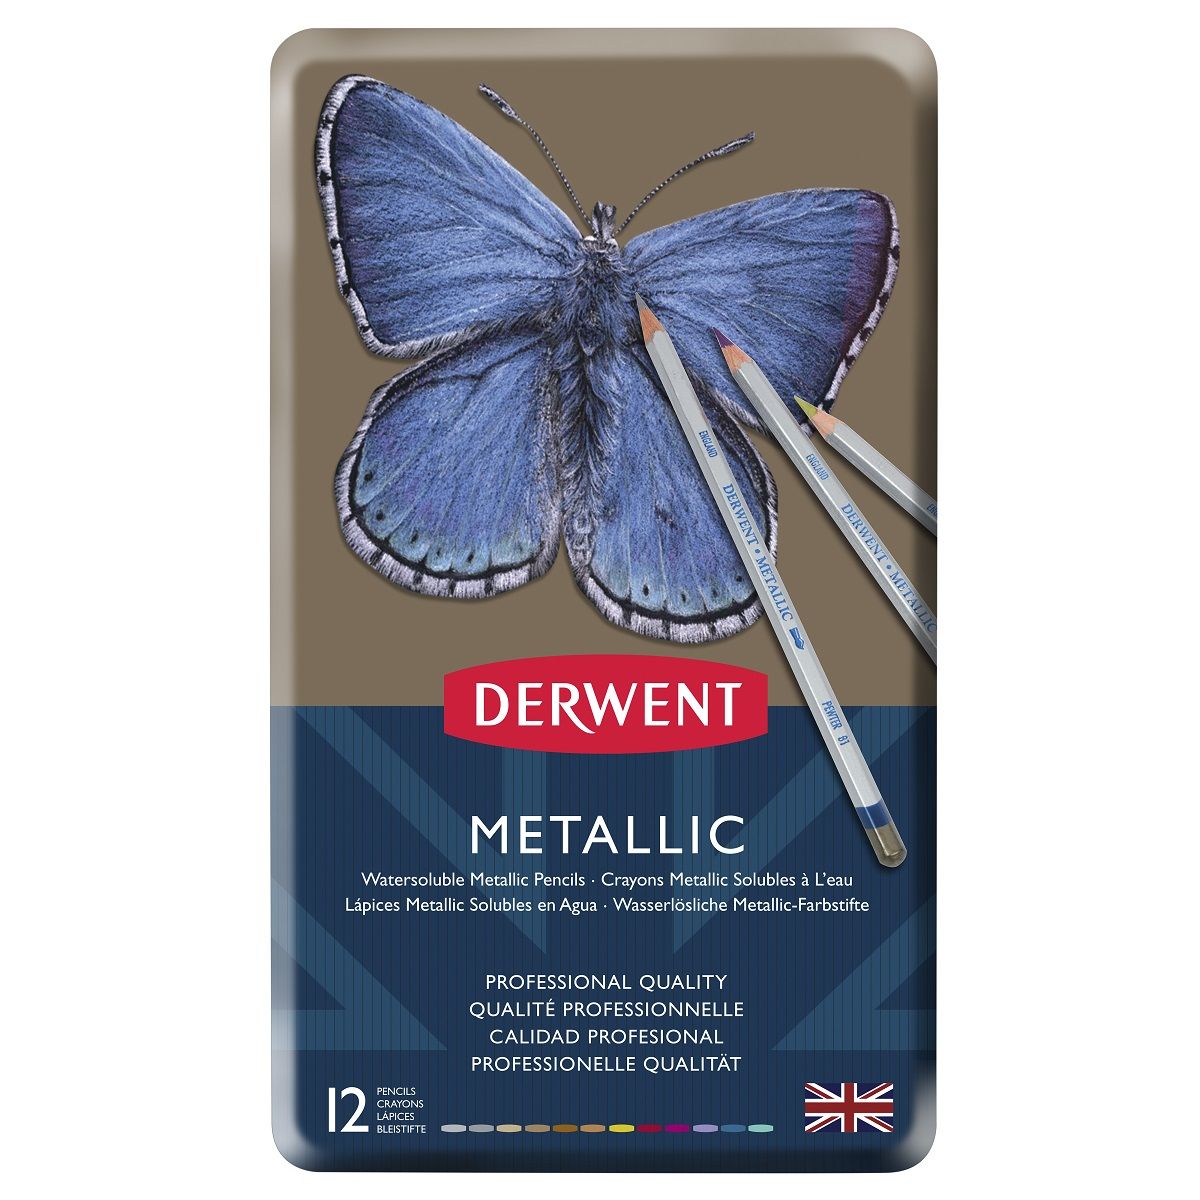 Derwent Tinted Charcoal Pencil Set - Assorted Colours, Tin Box, Set of 24